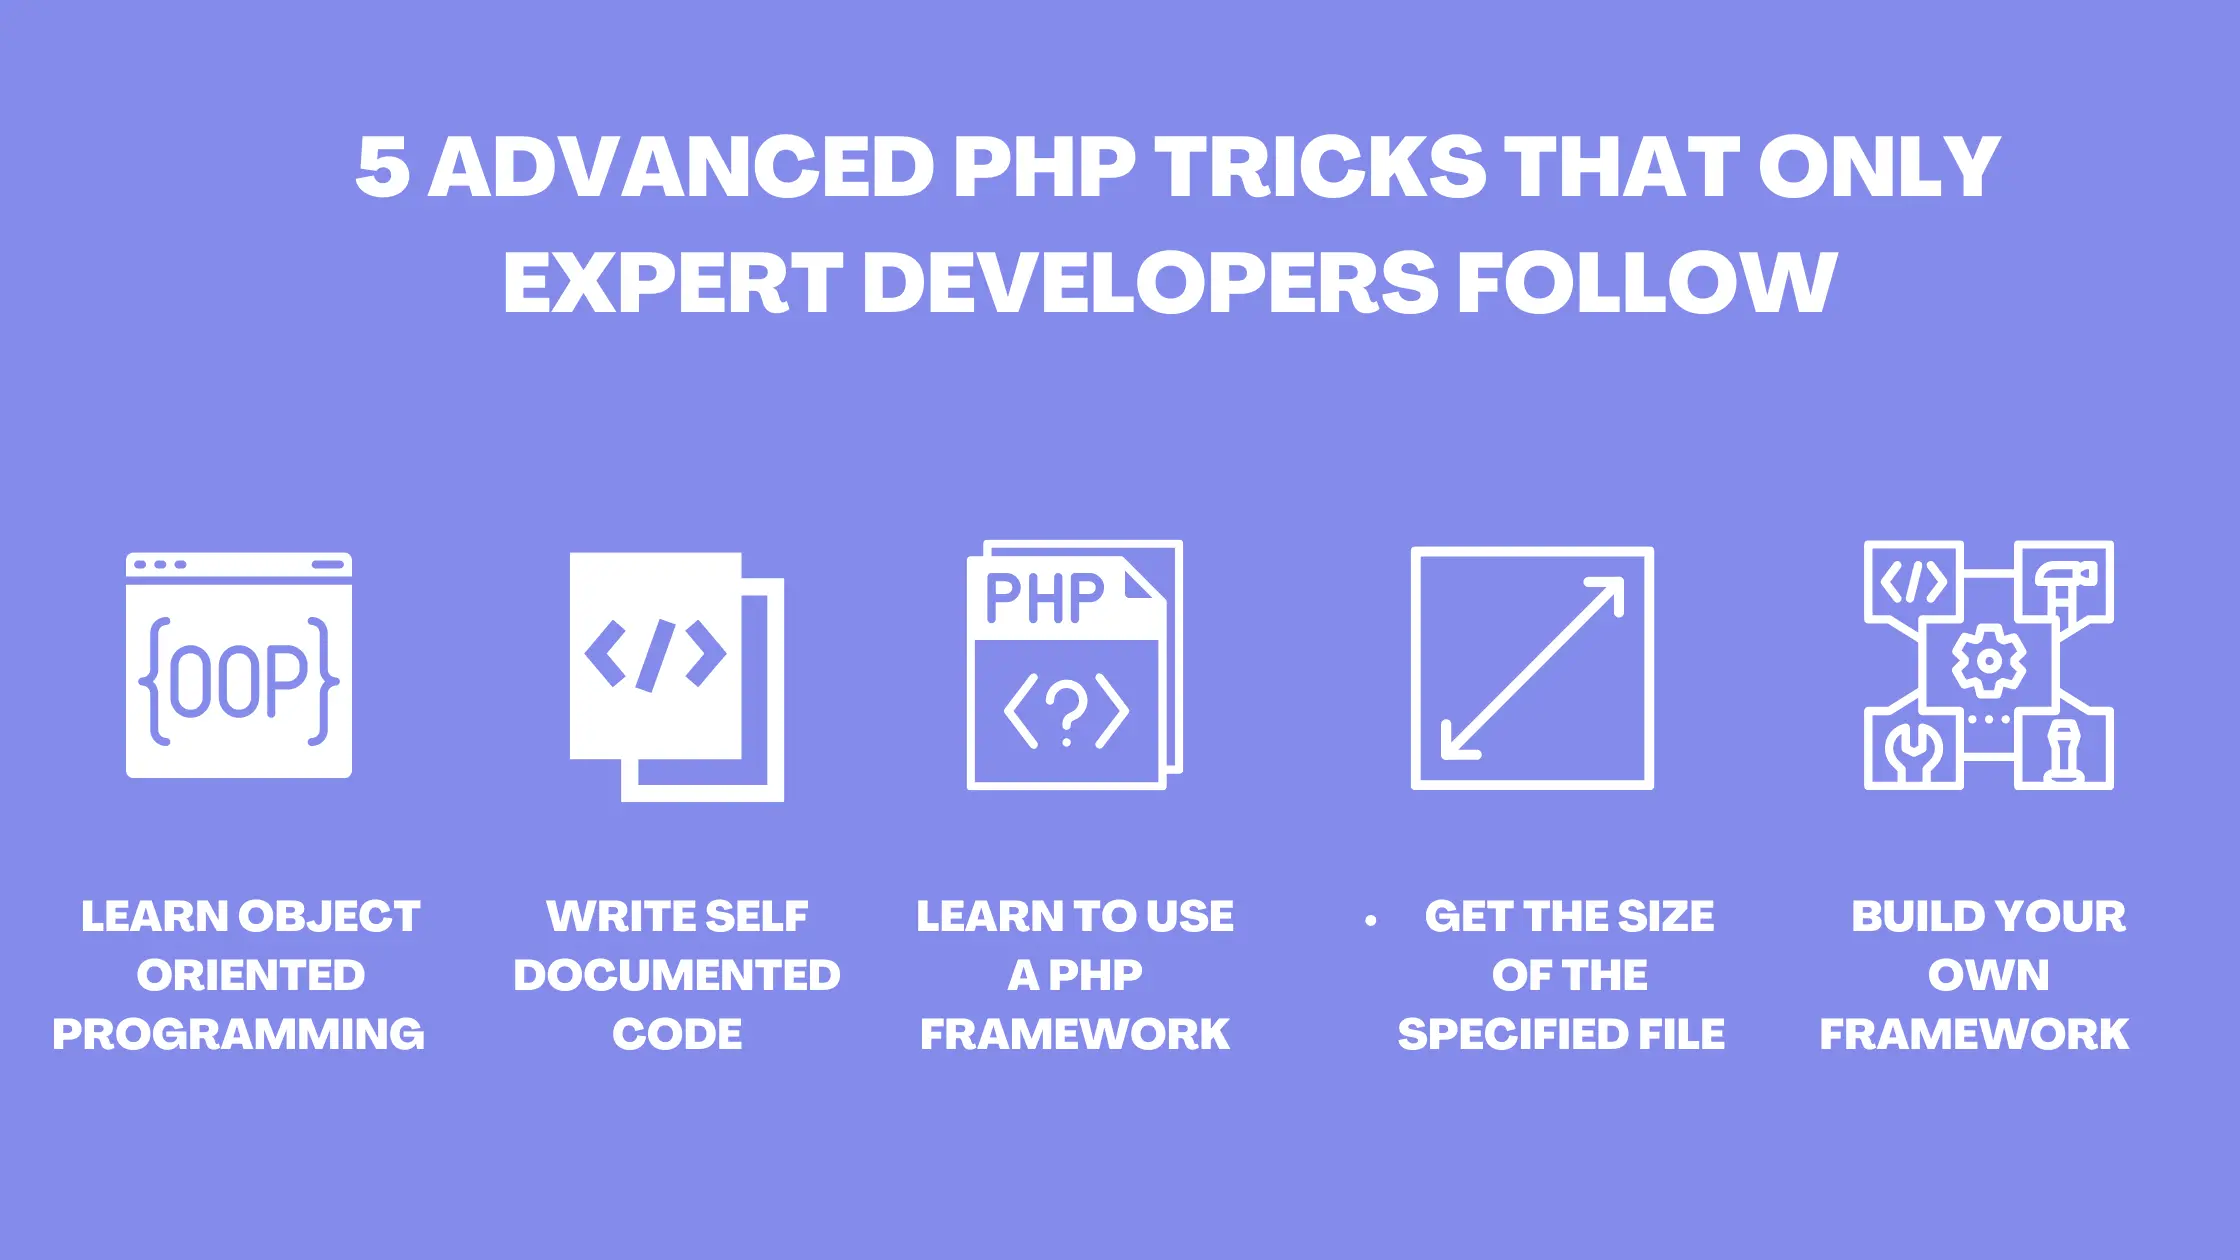 5 Advanced PHP Tricks For Developers